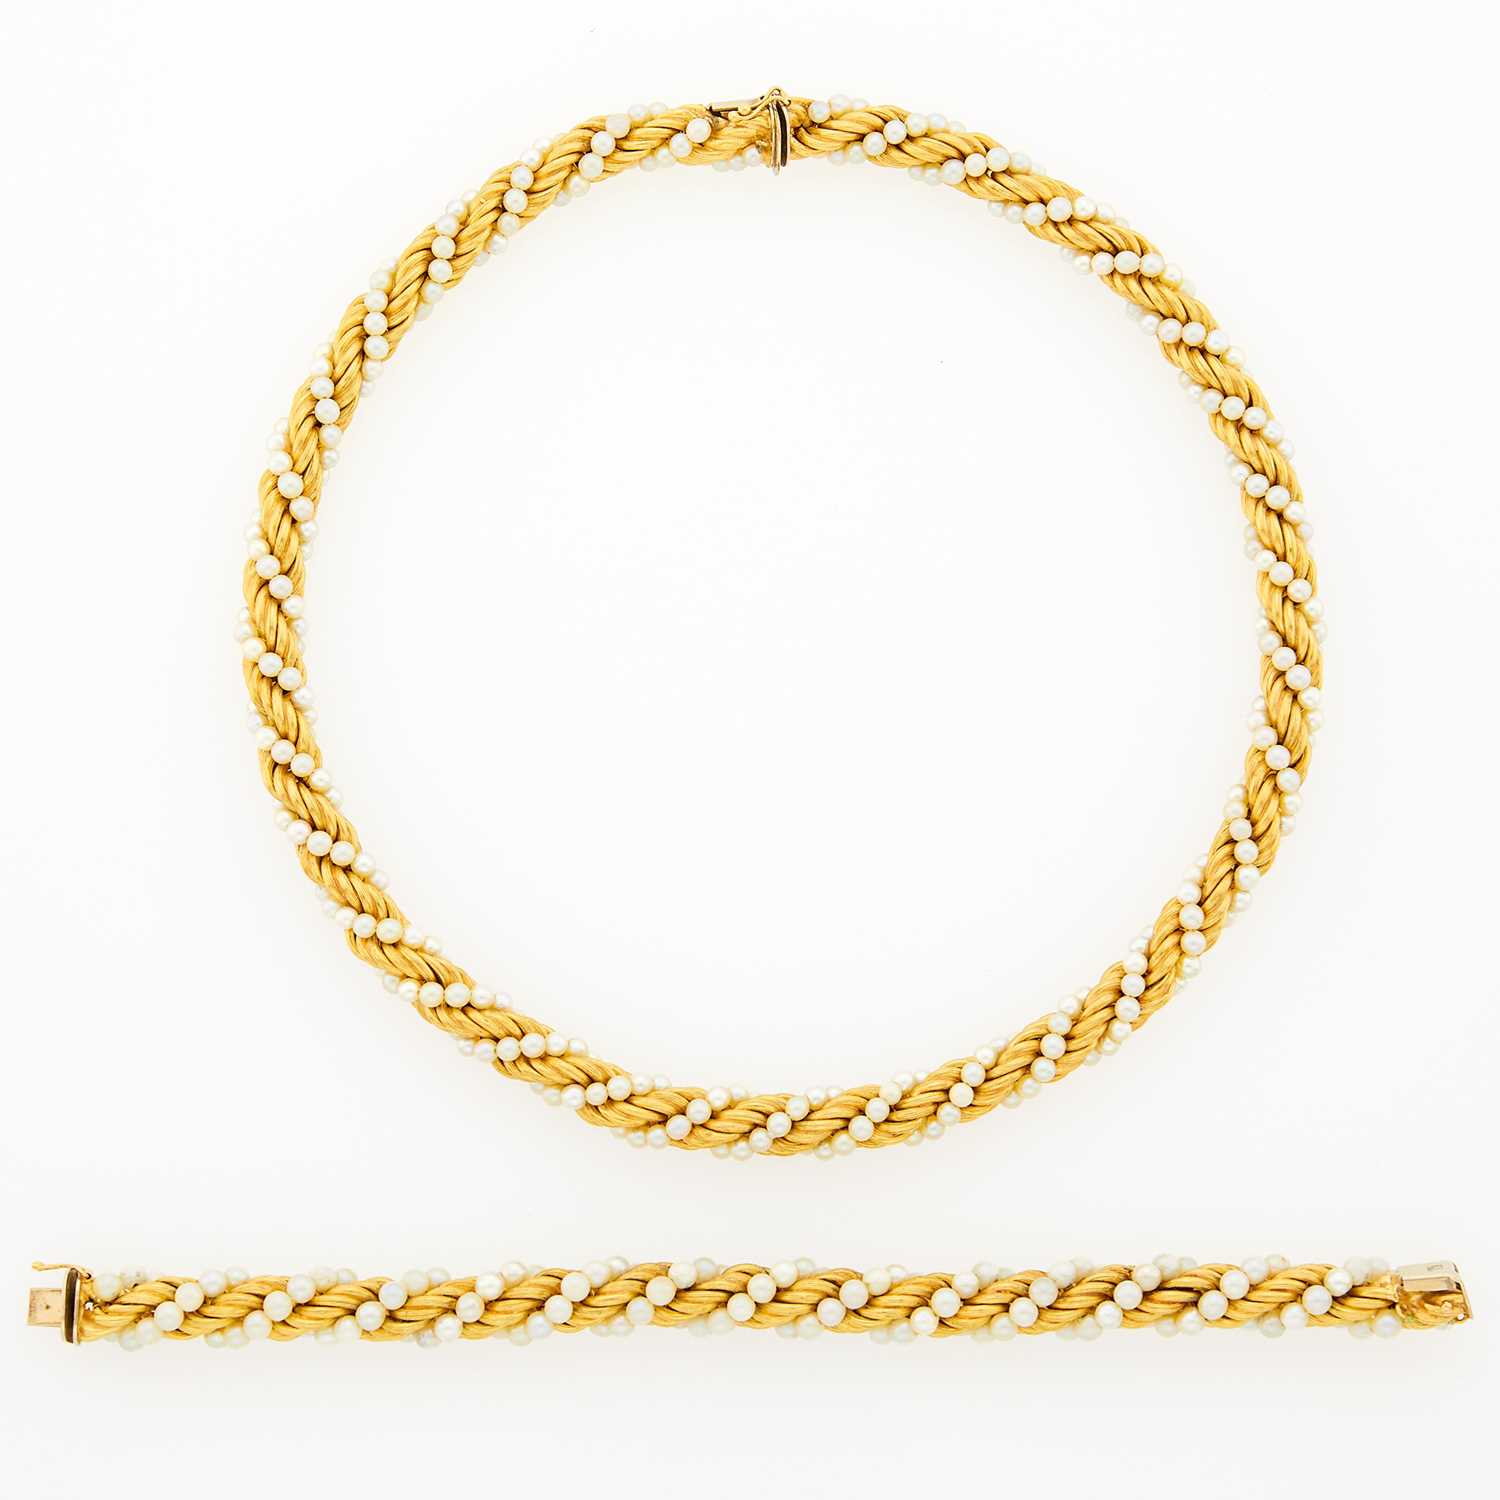 Lot 2071 - Gold and Cultured Pearl Rope-Twist Necklace and Bracelet